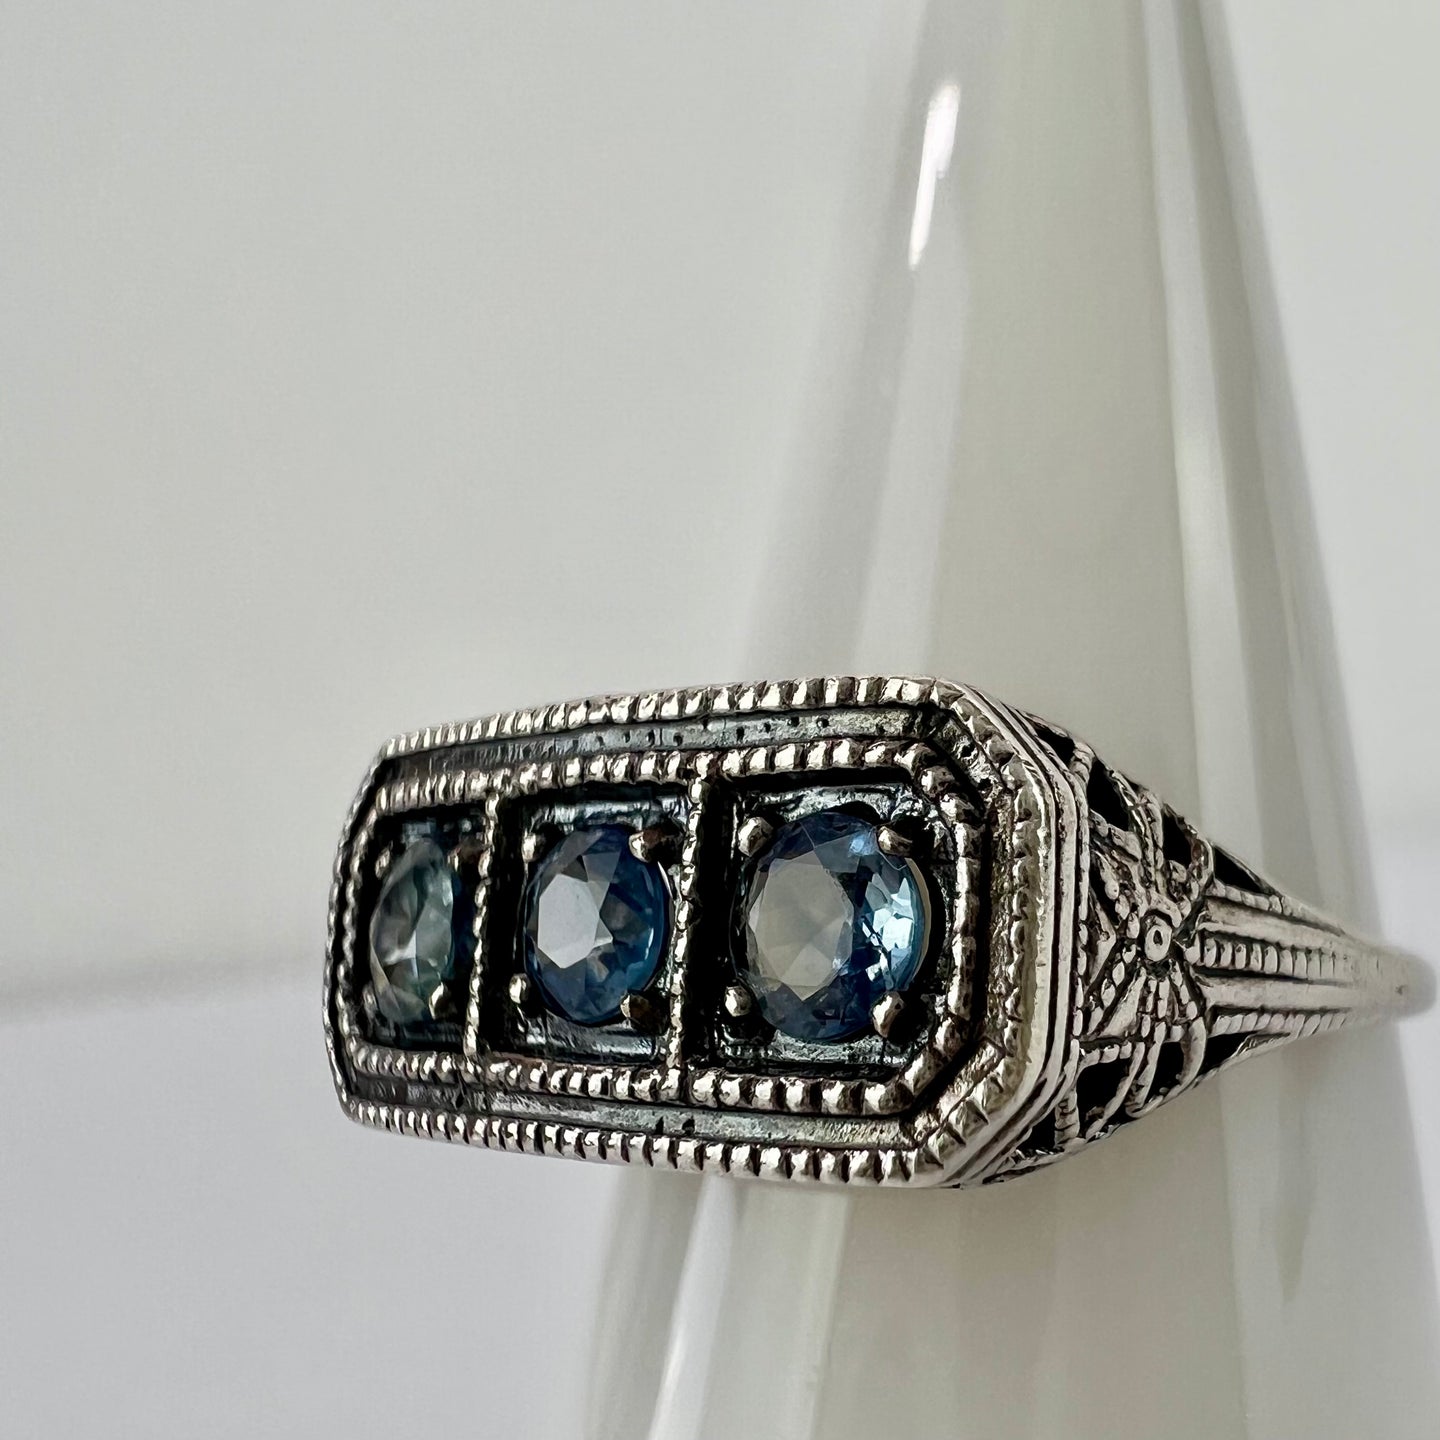 Vintage sterling silver filigree ring with three blue stones - size 8.This vintage sterling silver ring features three blue round cut stones set in a delicate filigree setting. Round cut, prong set stones, with an open back.  Excellent vintage condition. Perfect gift for a mother of 3 for Mother's day! 